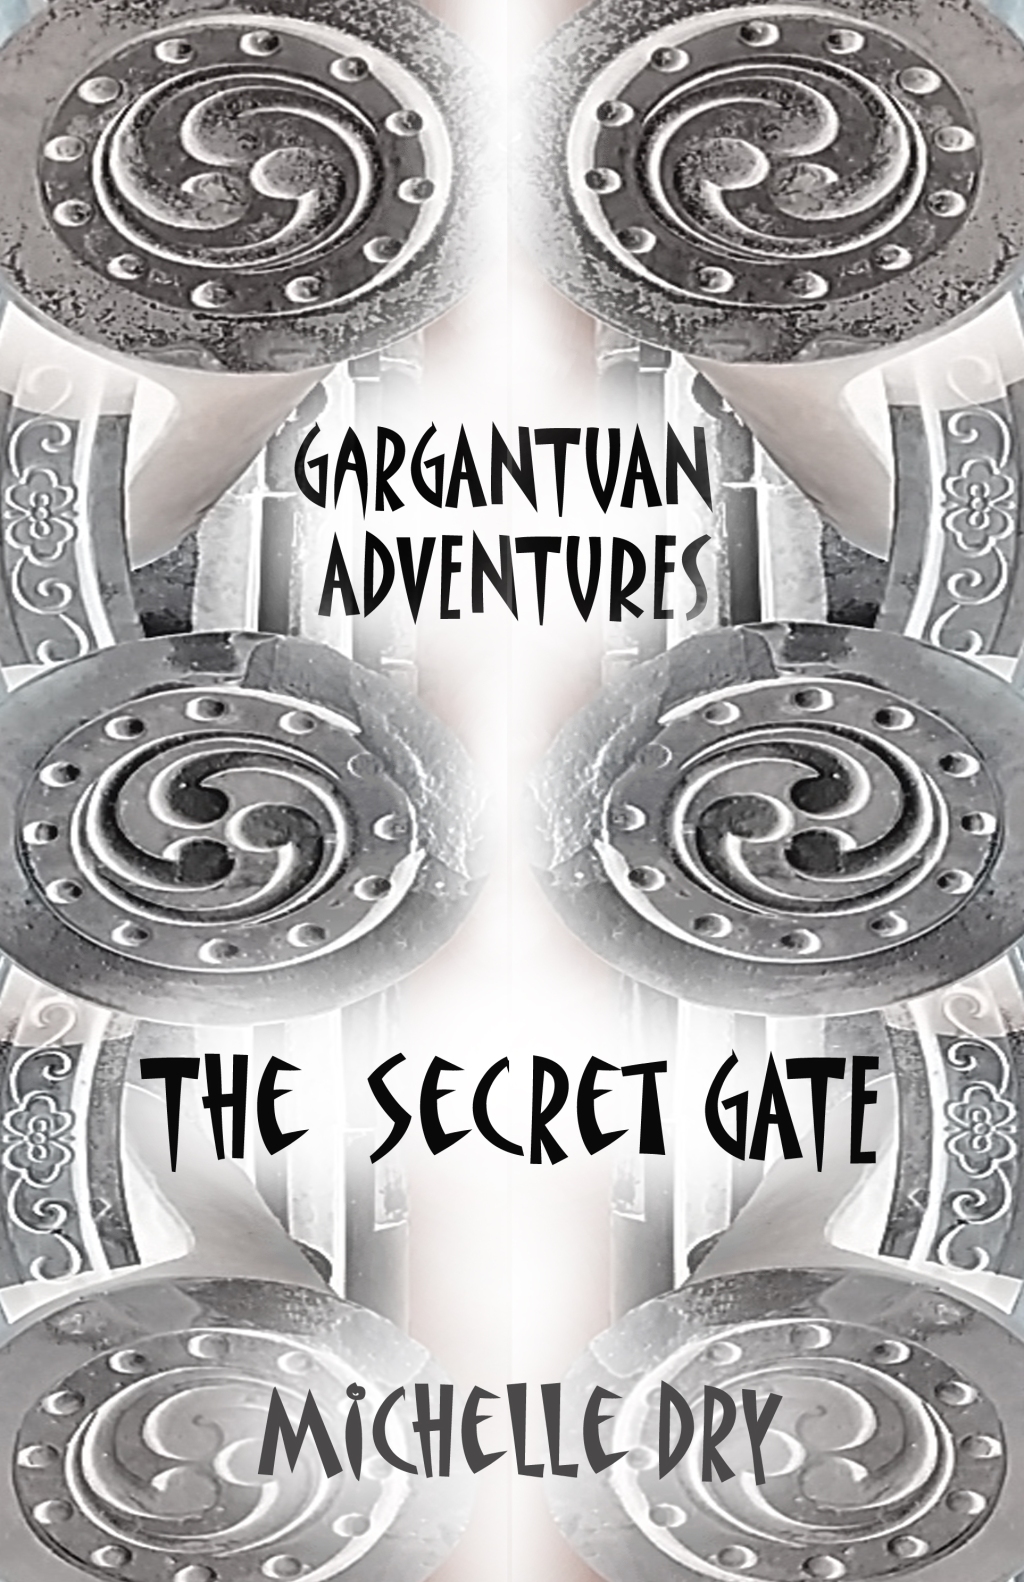 4 DAYS TO GO UNTIL GARGANTUAN ADVENTURES IS AVAILABLE ON AMAZON!